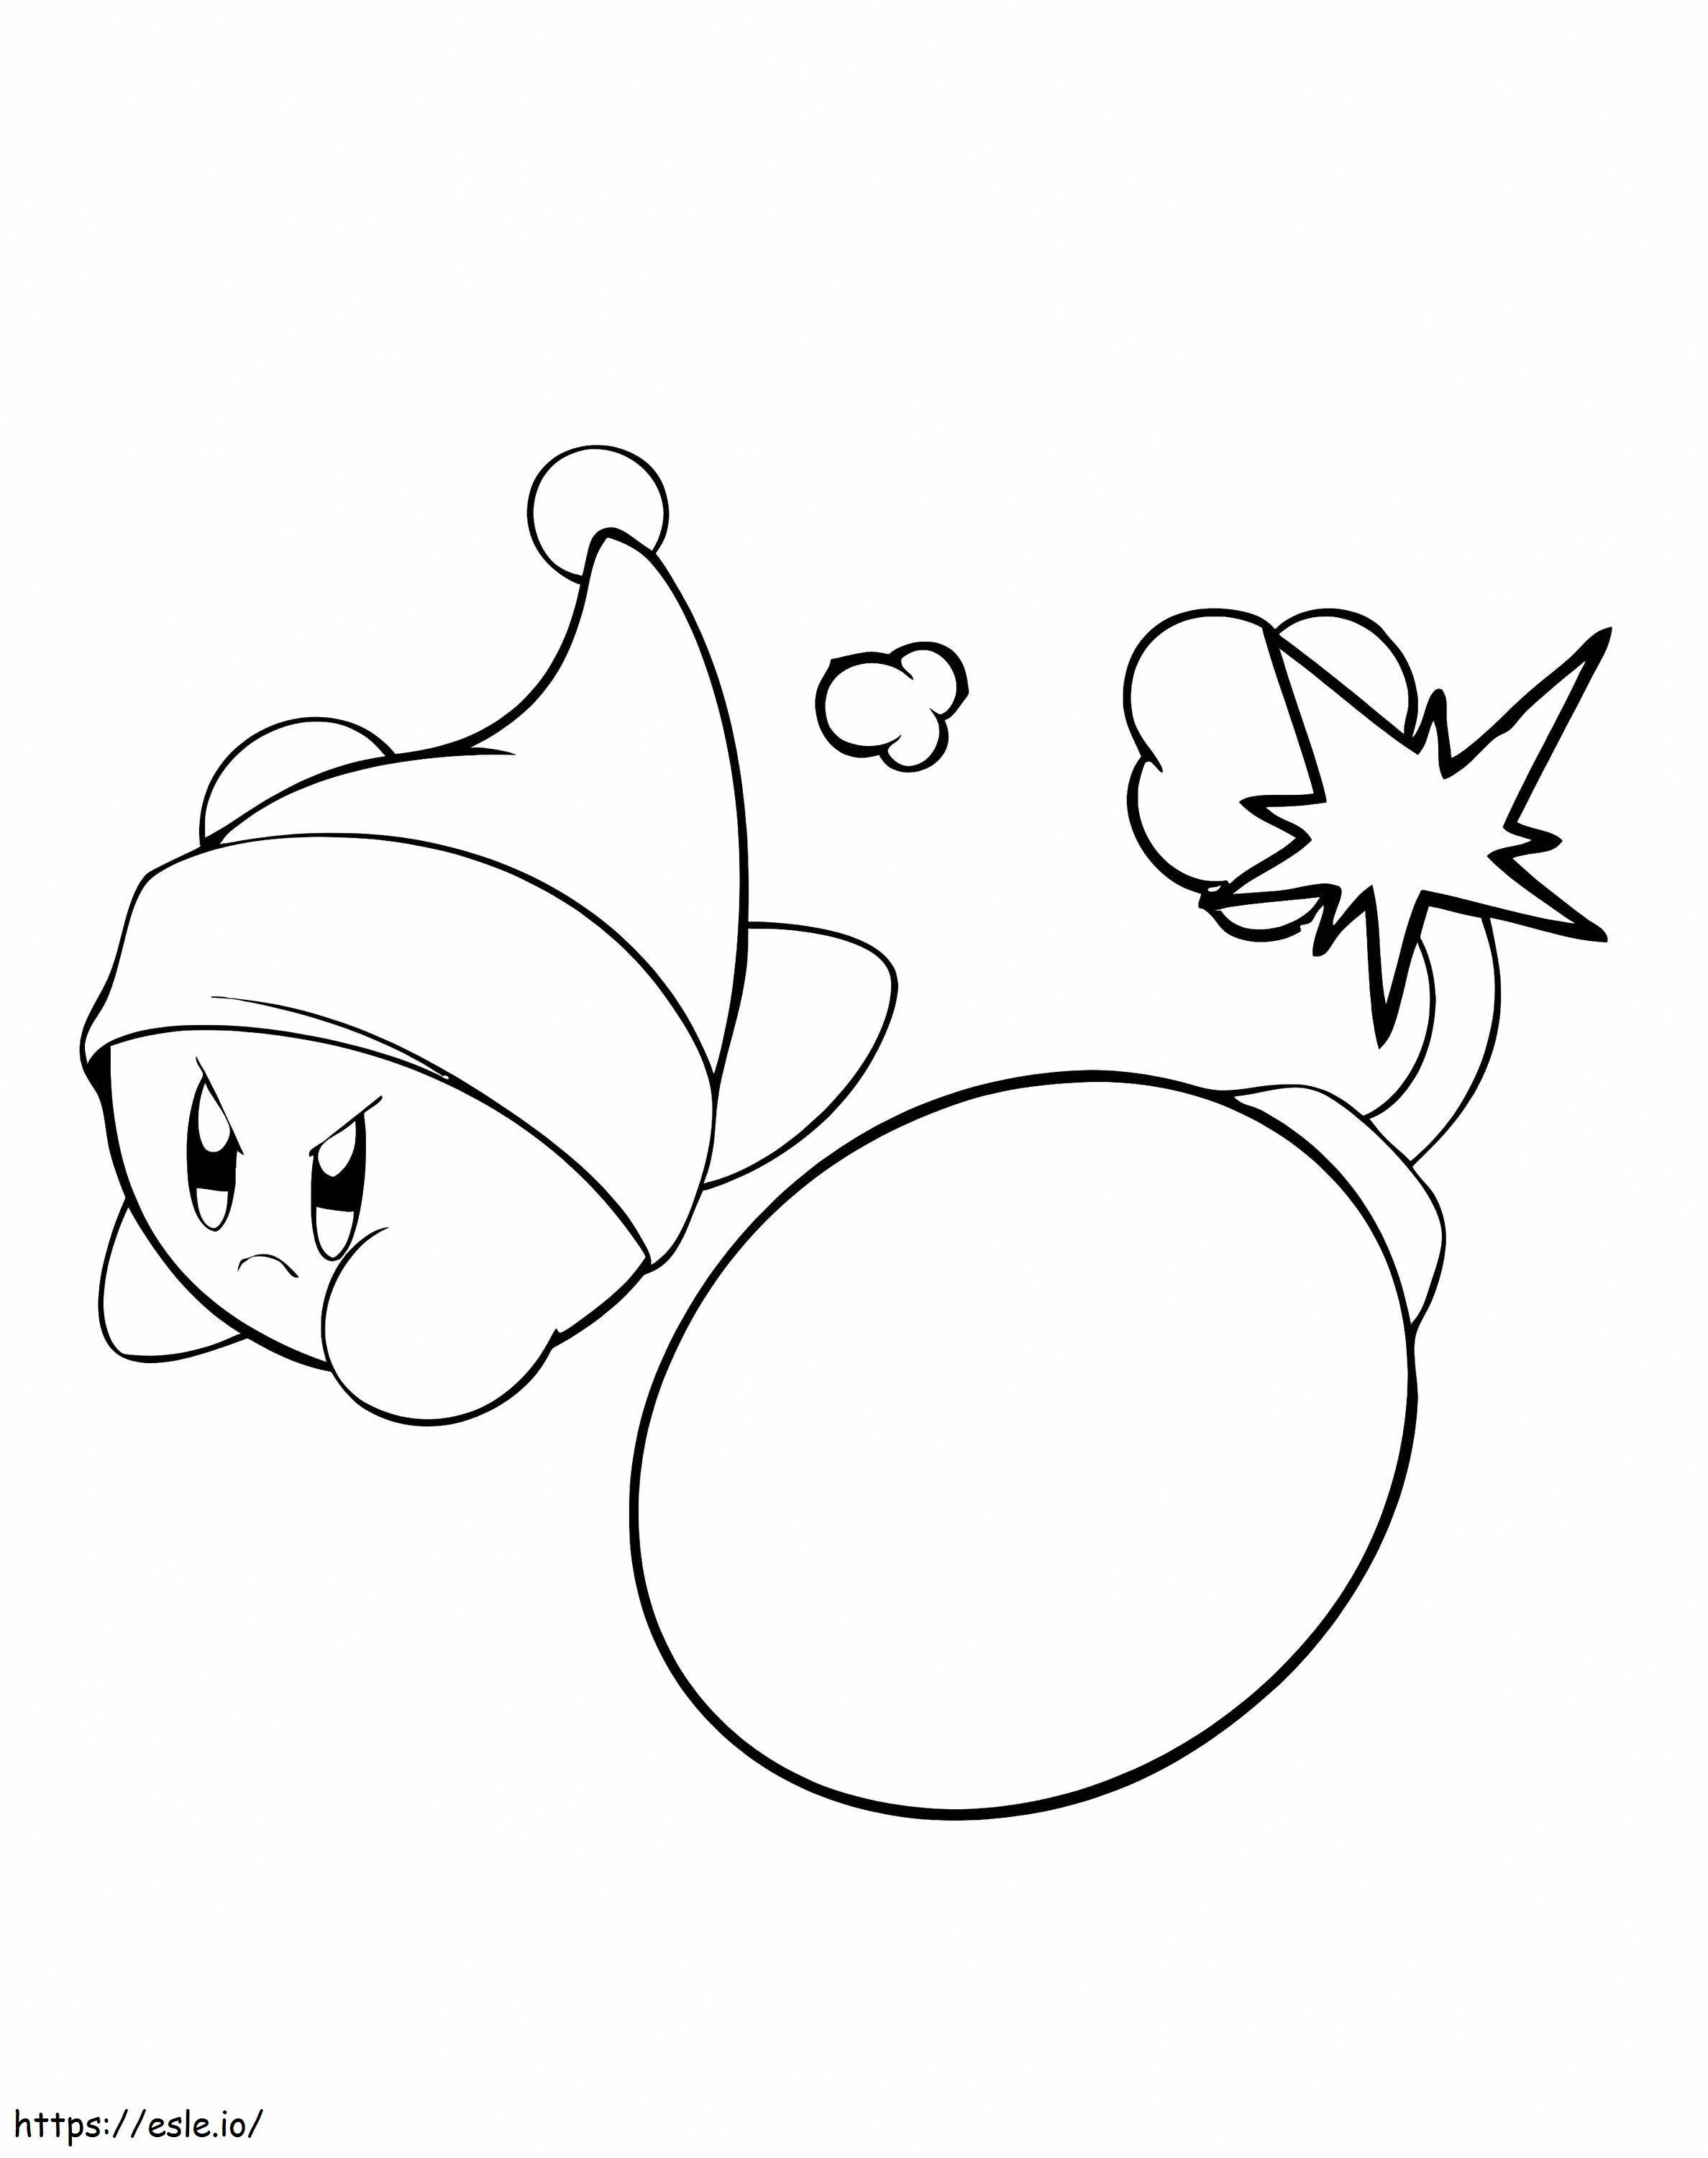 Bomb Kirby coloring page